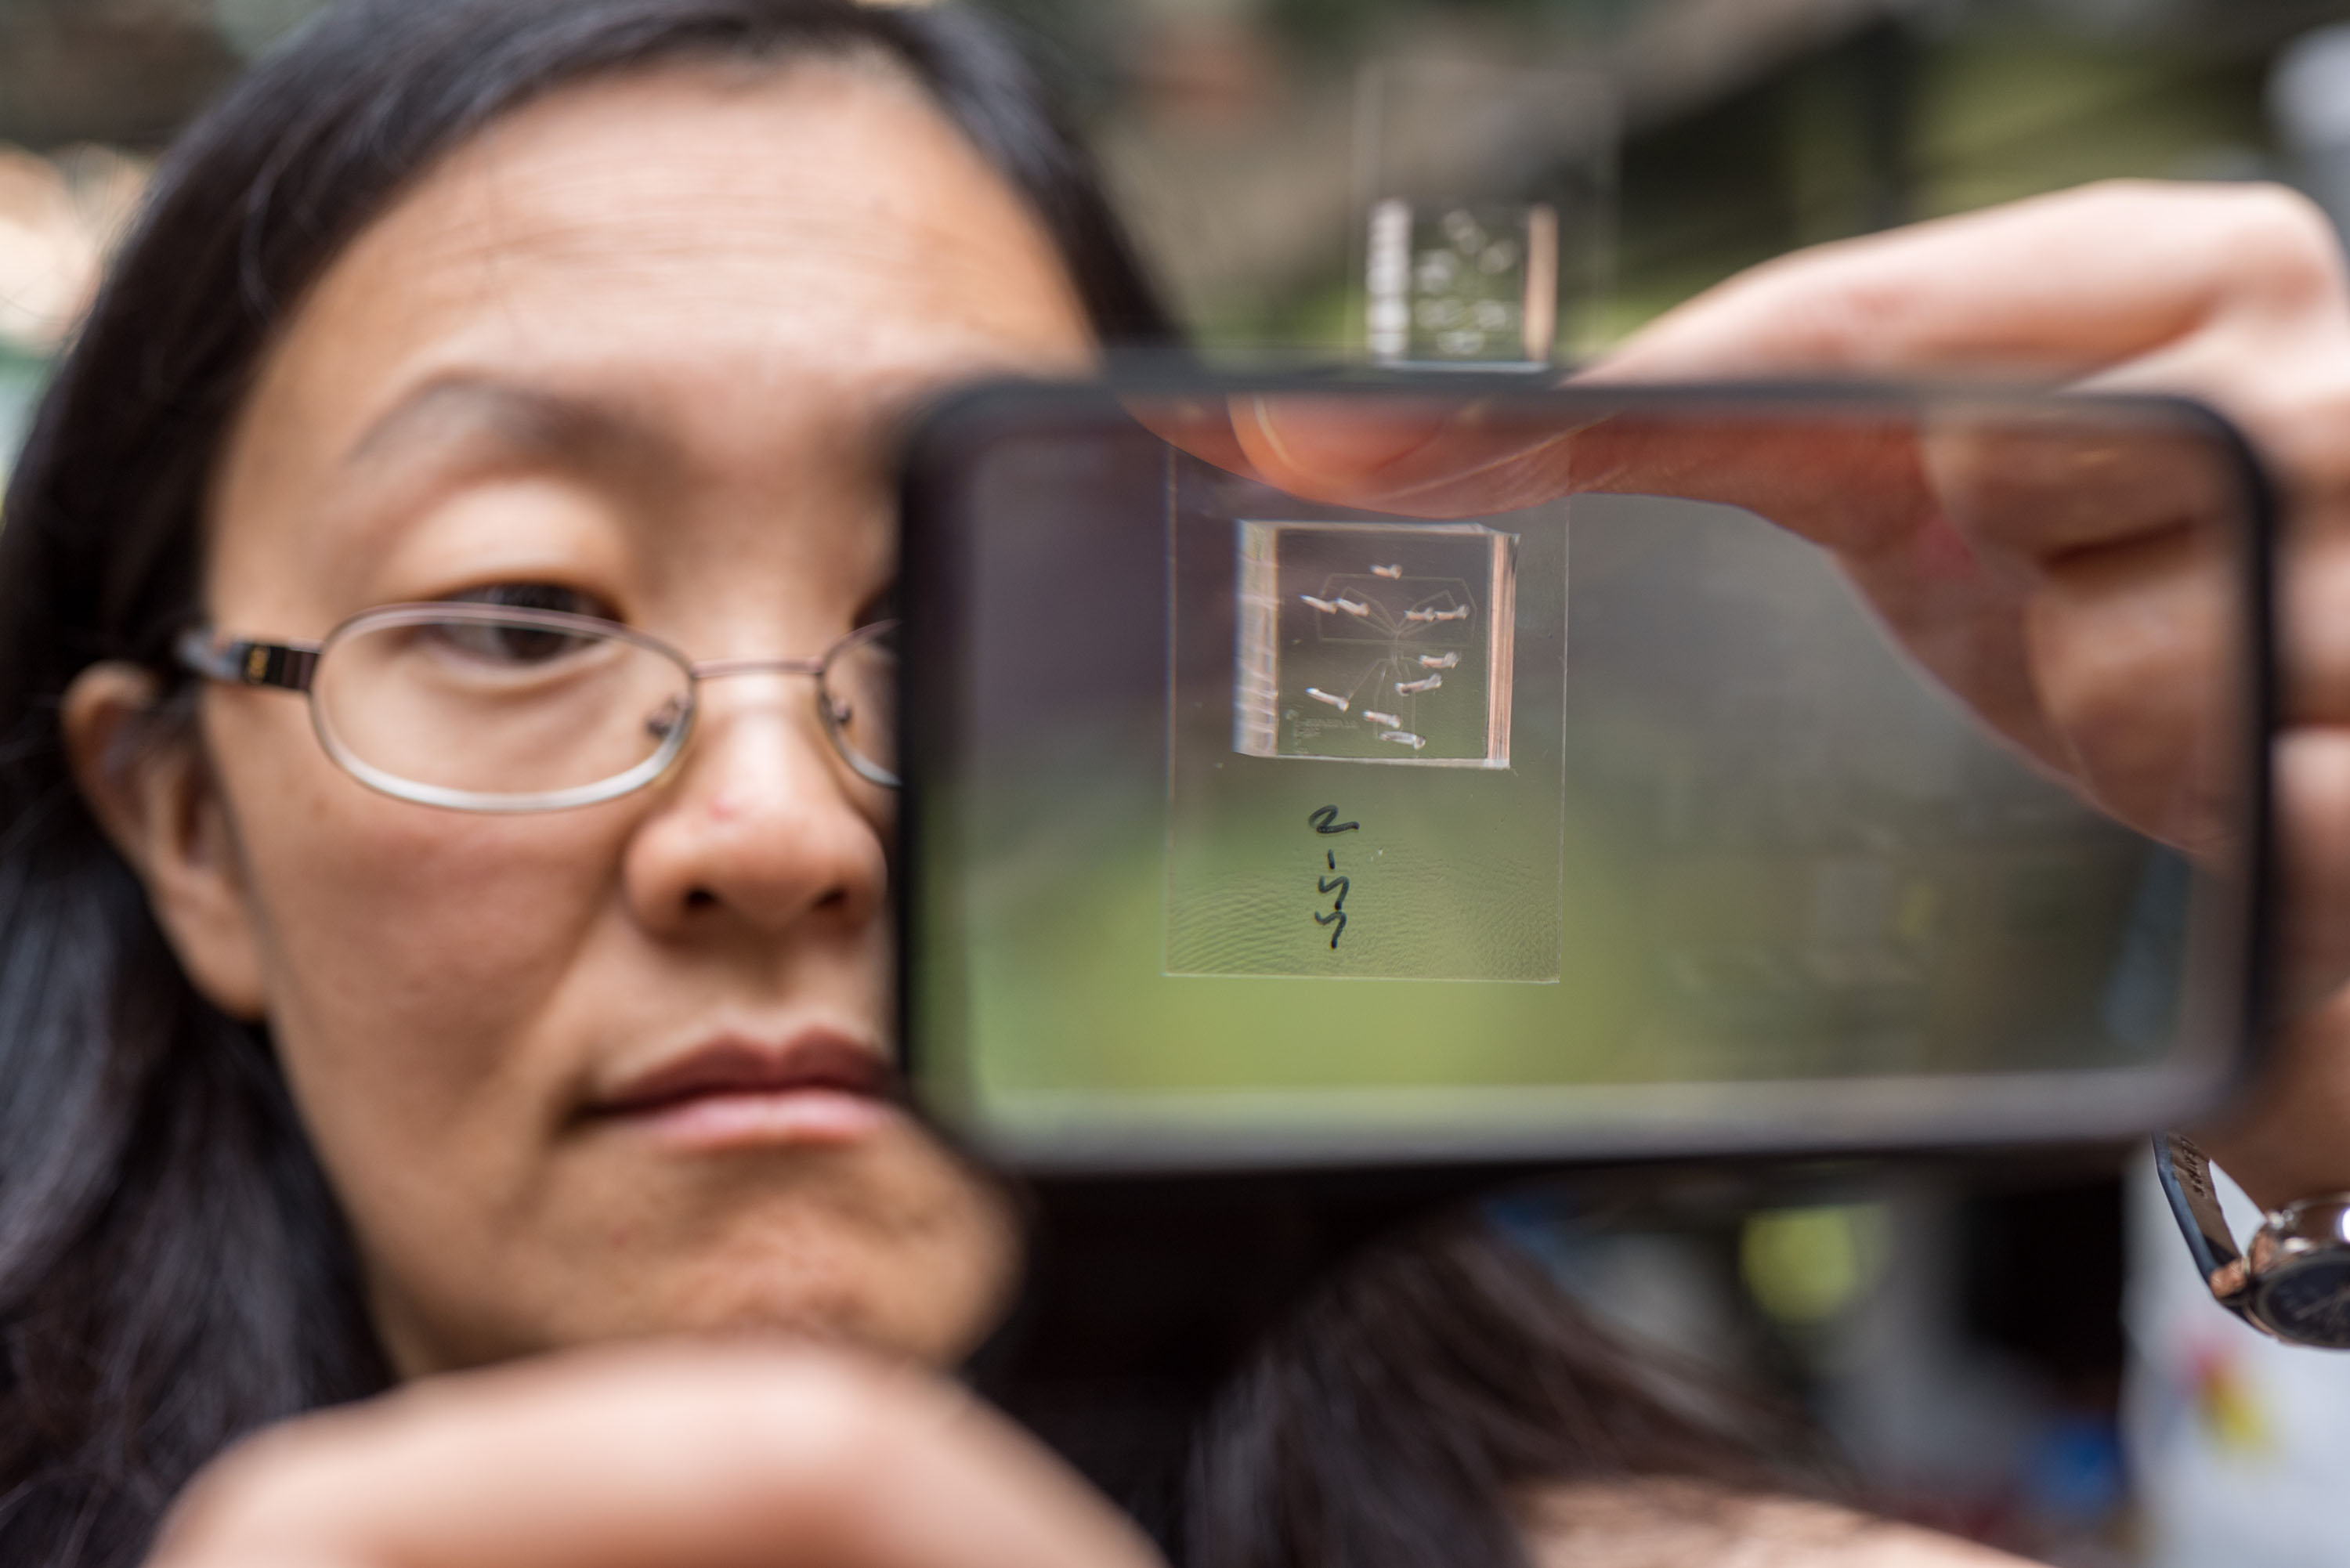 Engineering Professor Hang Lu holds up a chip used to immobilize C. elegans roundworms for photographing by a microscope optic connected to a computer. The chip then sorts the worms into one of two channels for either mutants or non-mutants, a status an algorythm determines based on subtle phenotypical differences it recognizes in the microscope photo. Credit: Georgia Tech / Rob Felt